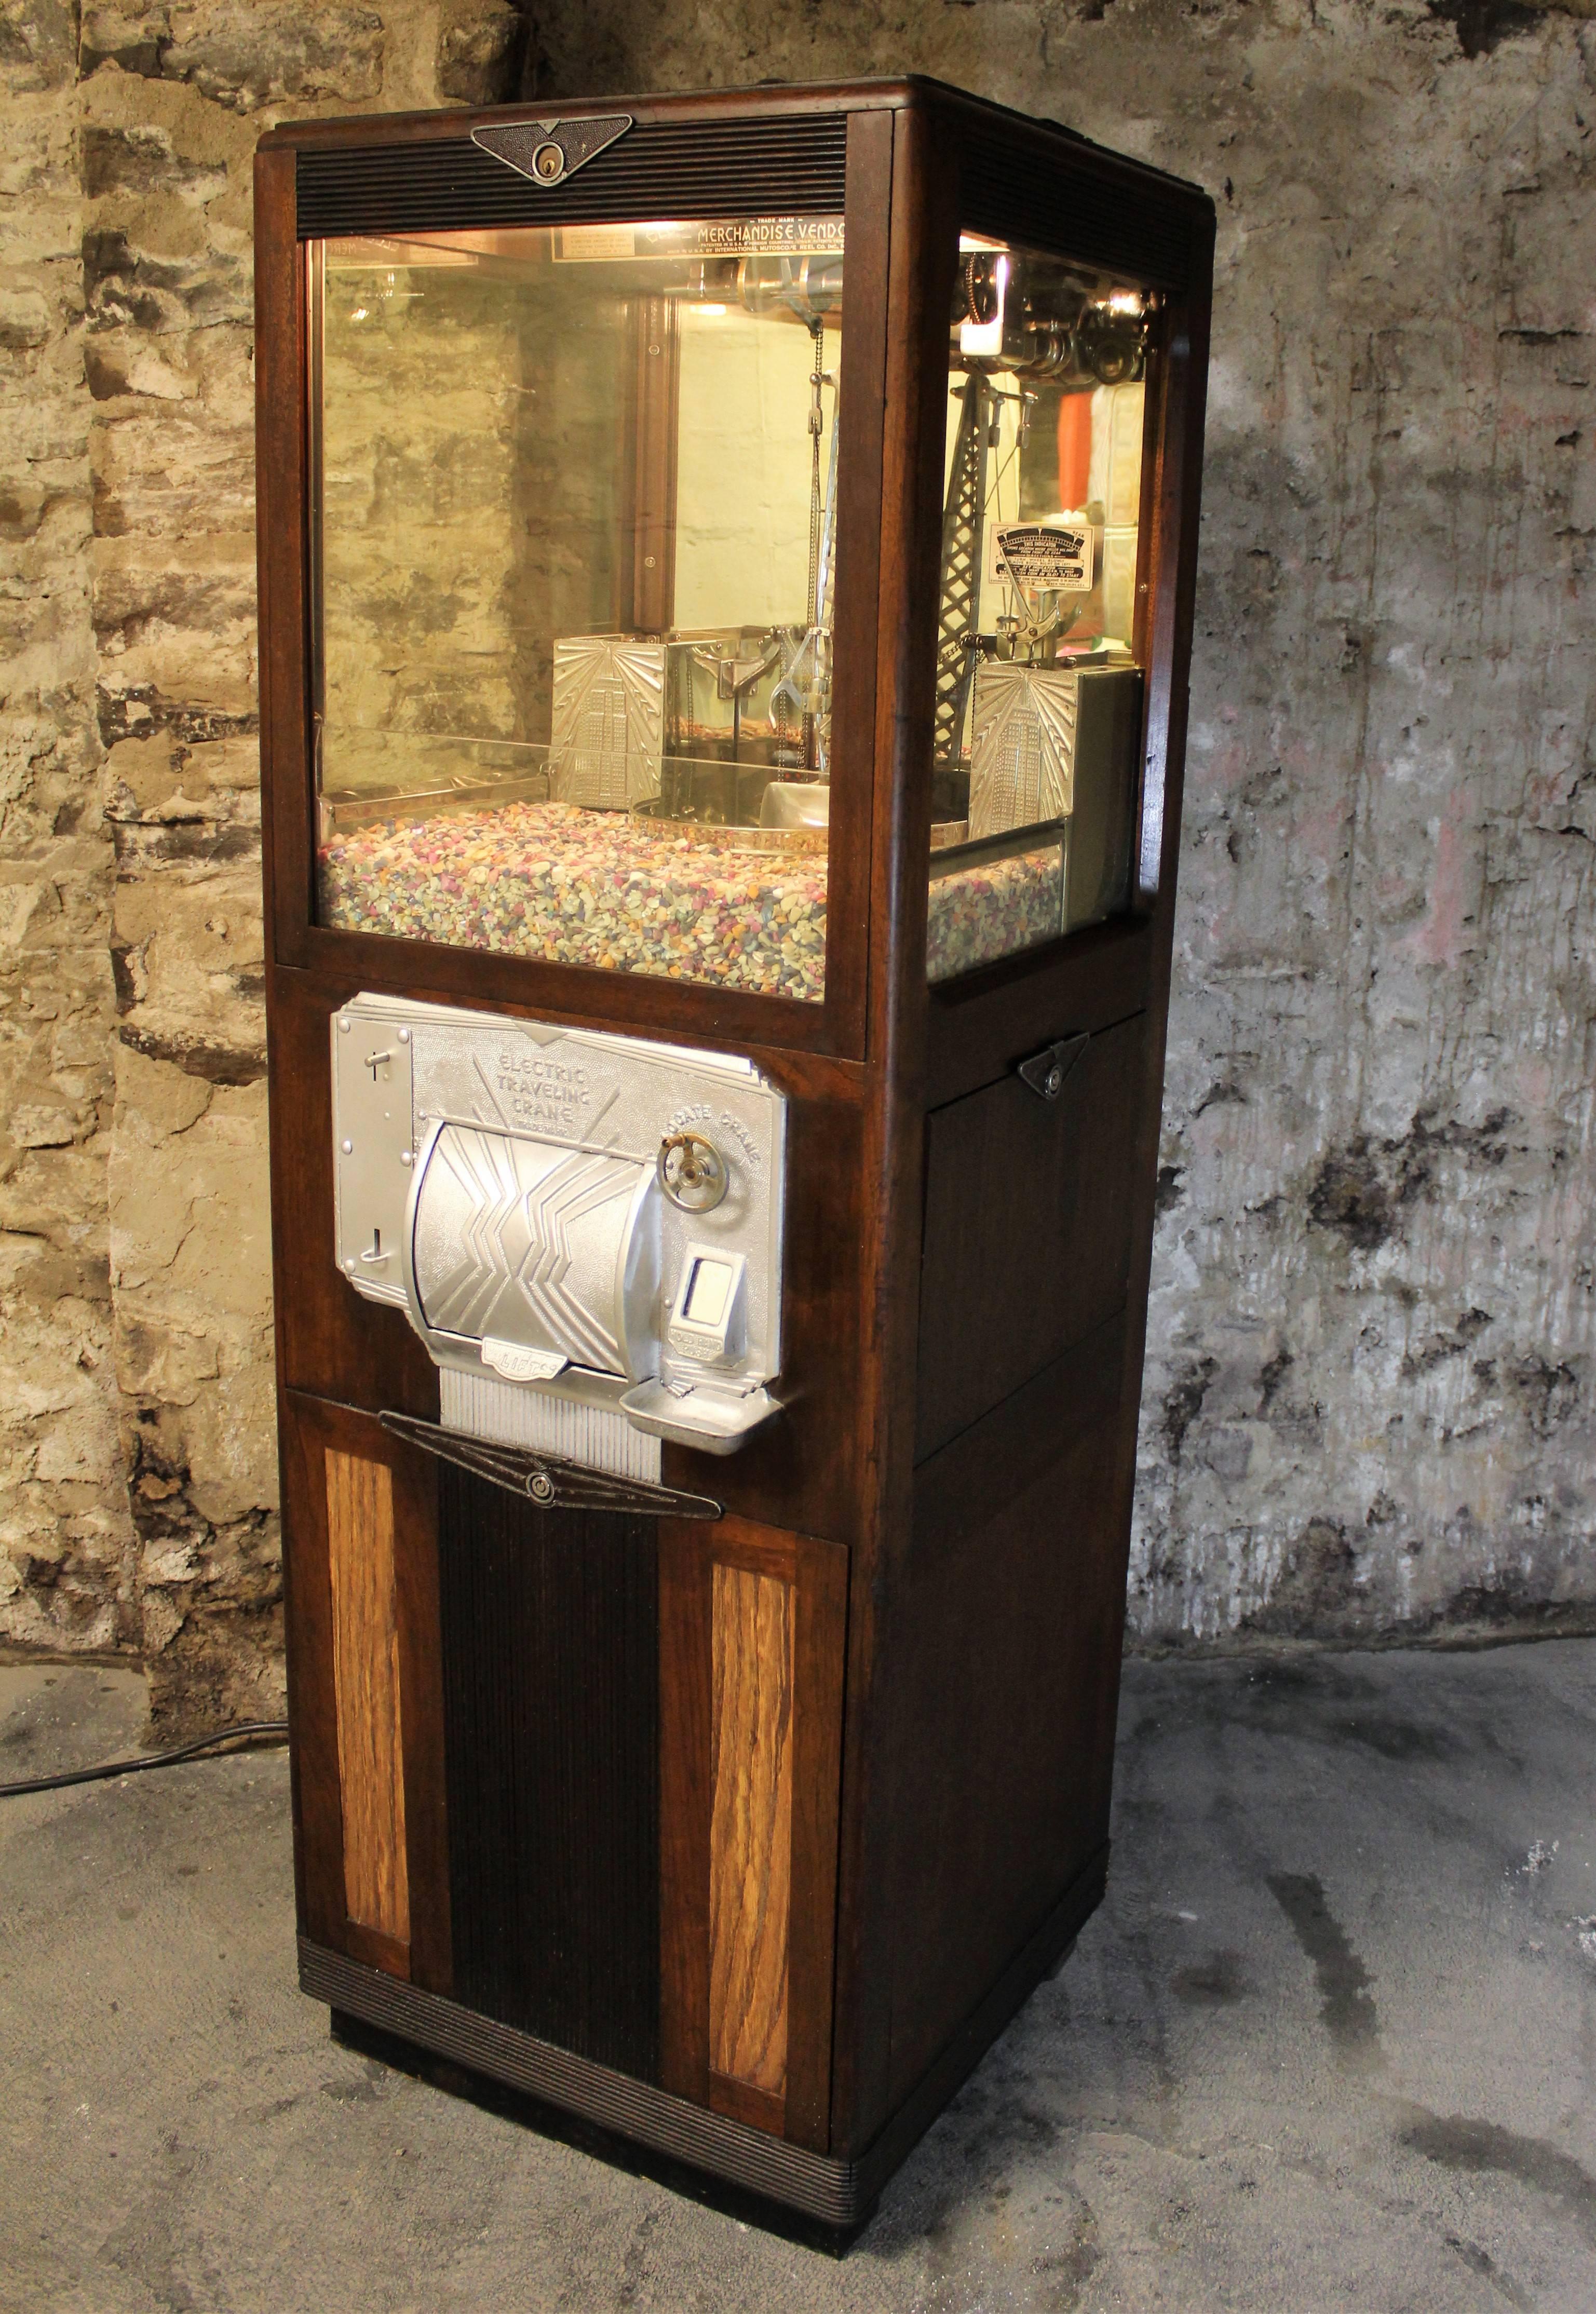 mutoscope for sale